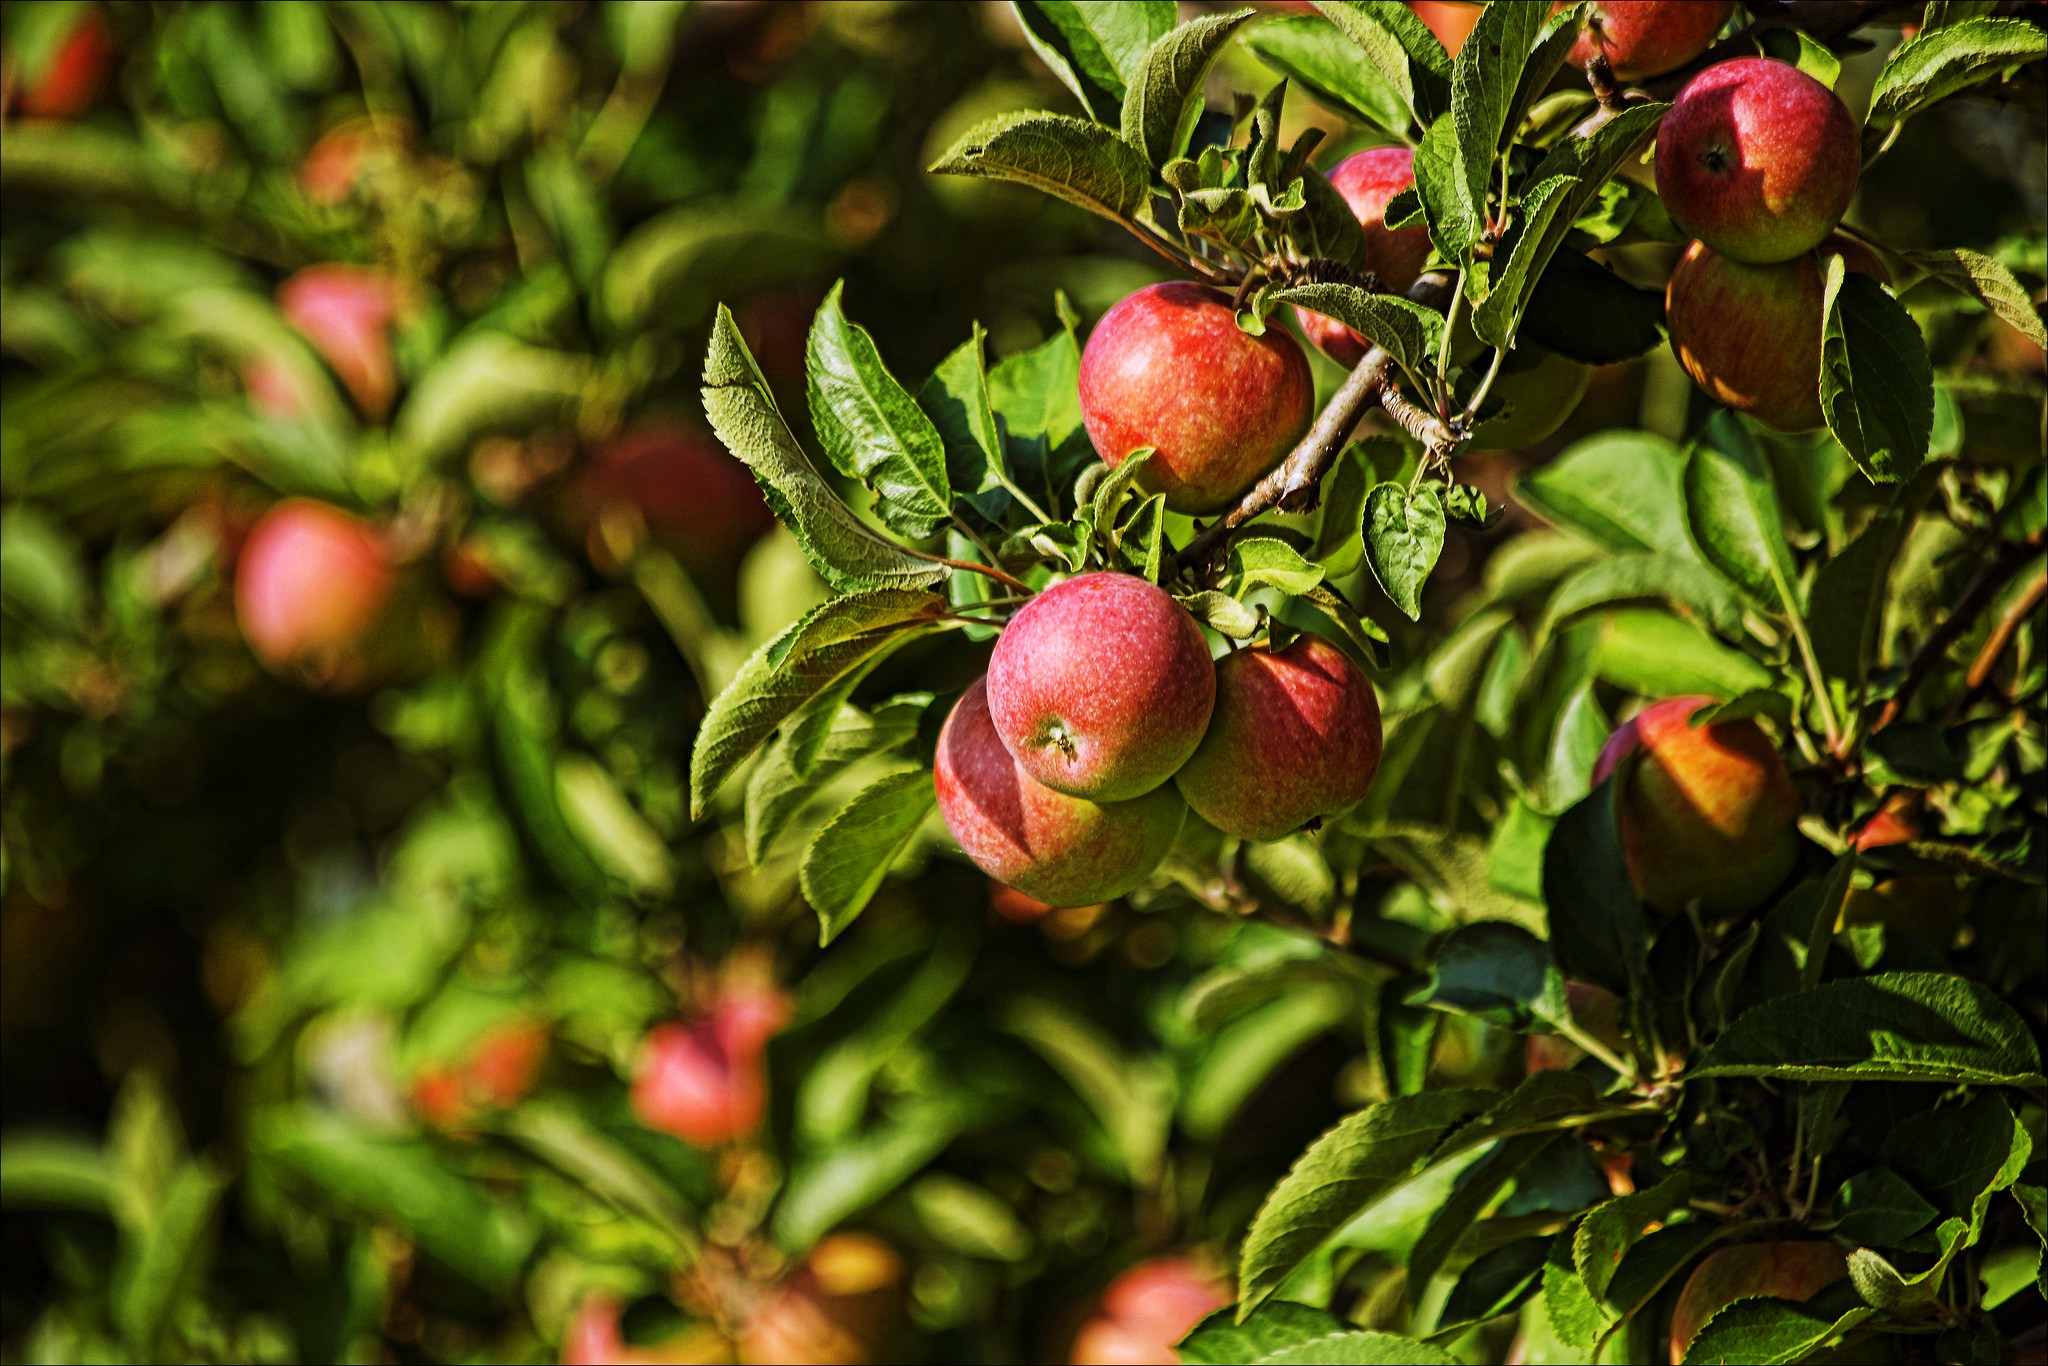 Closeup image of Apples hanging off a tree in an orchard.